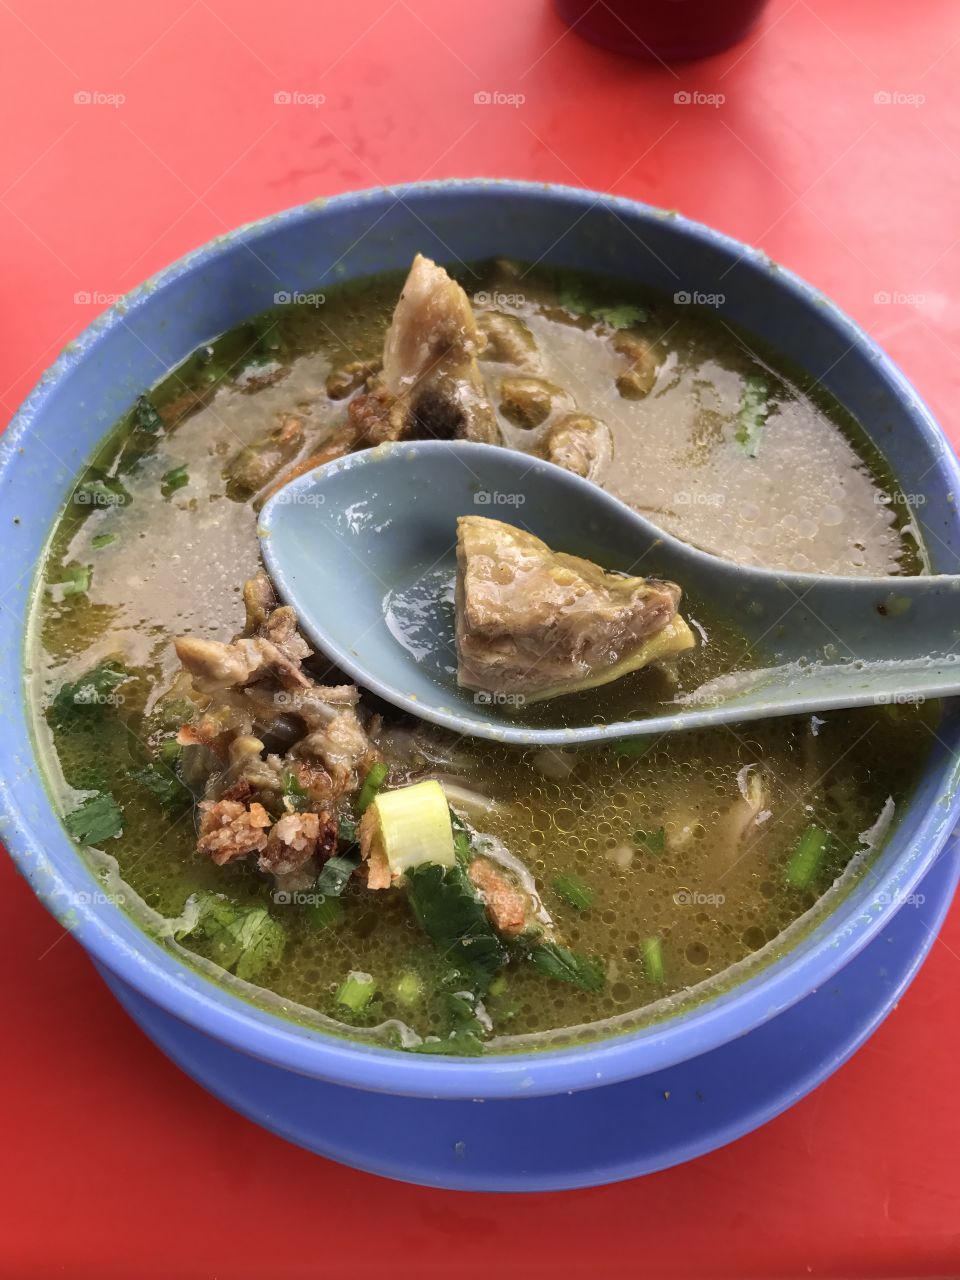 Spicy mutton soup